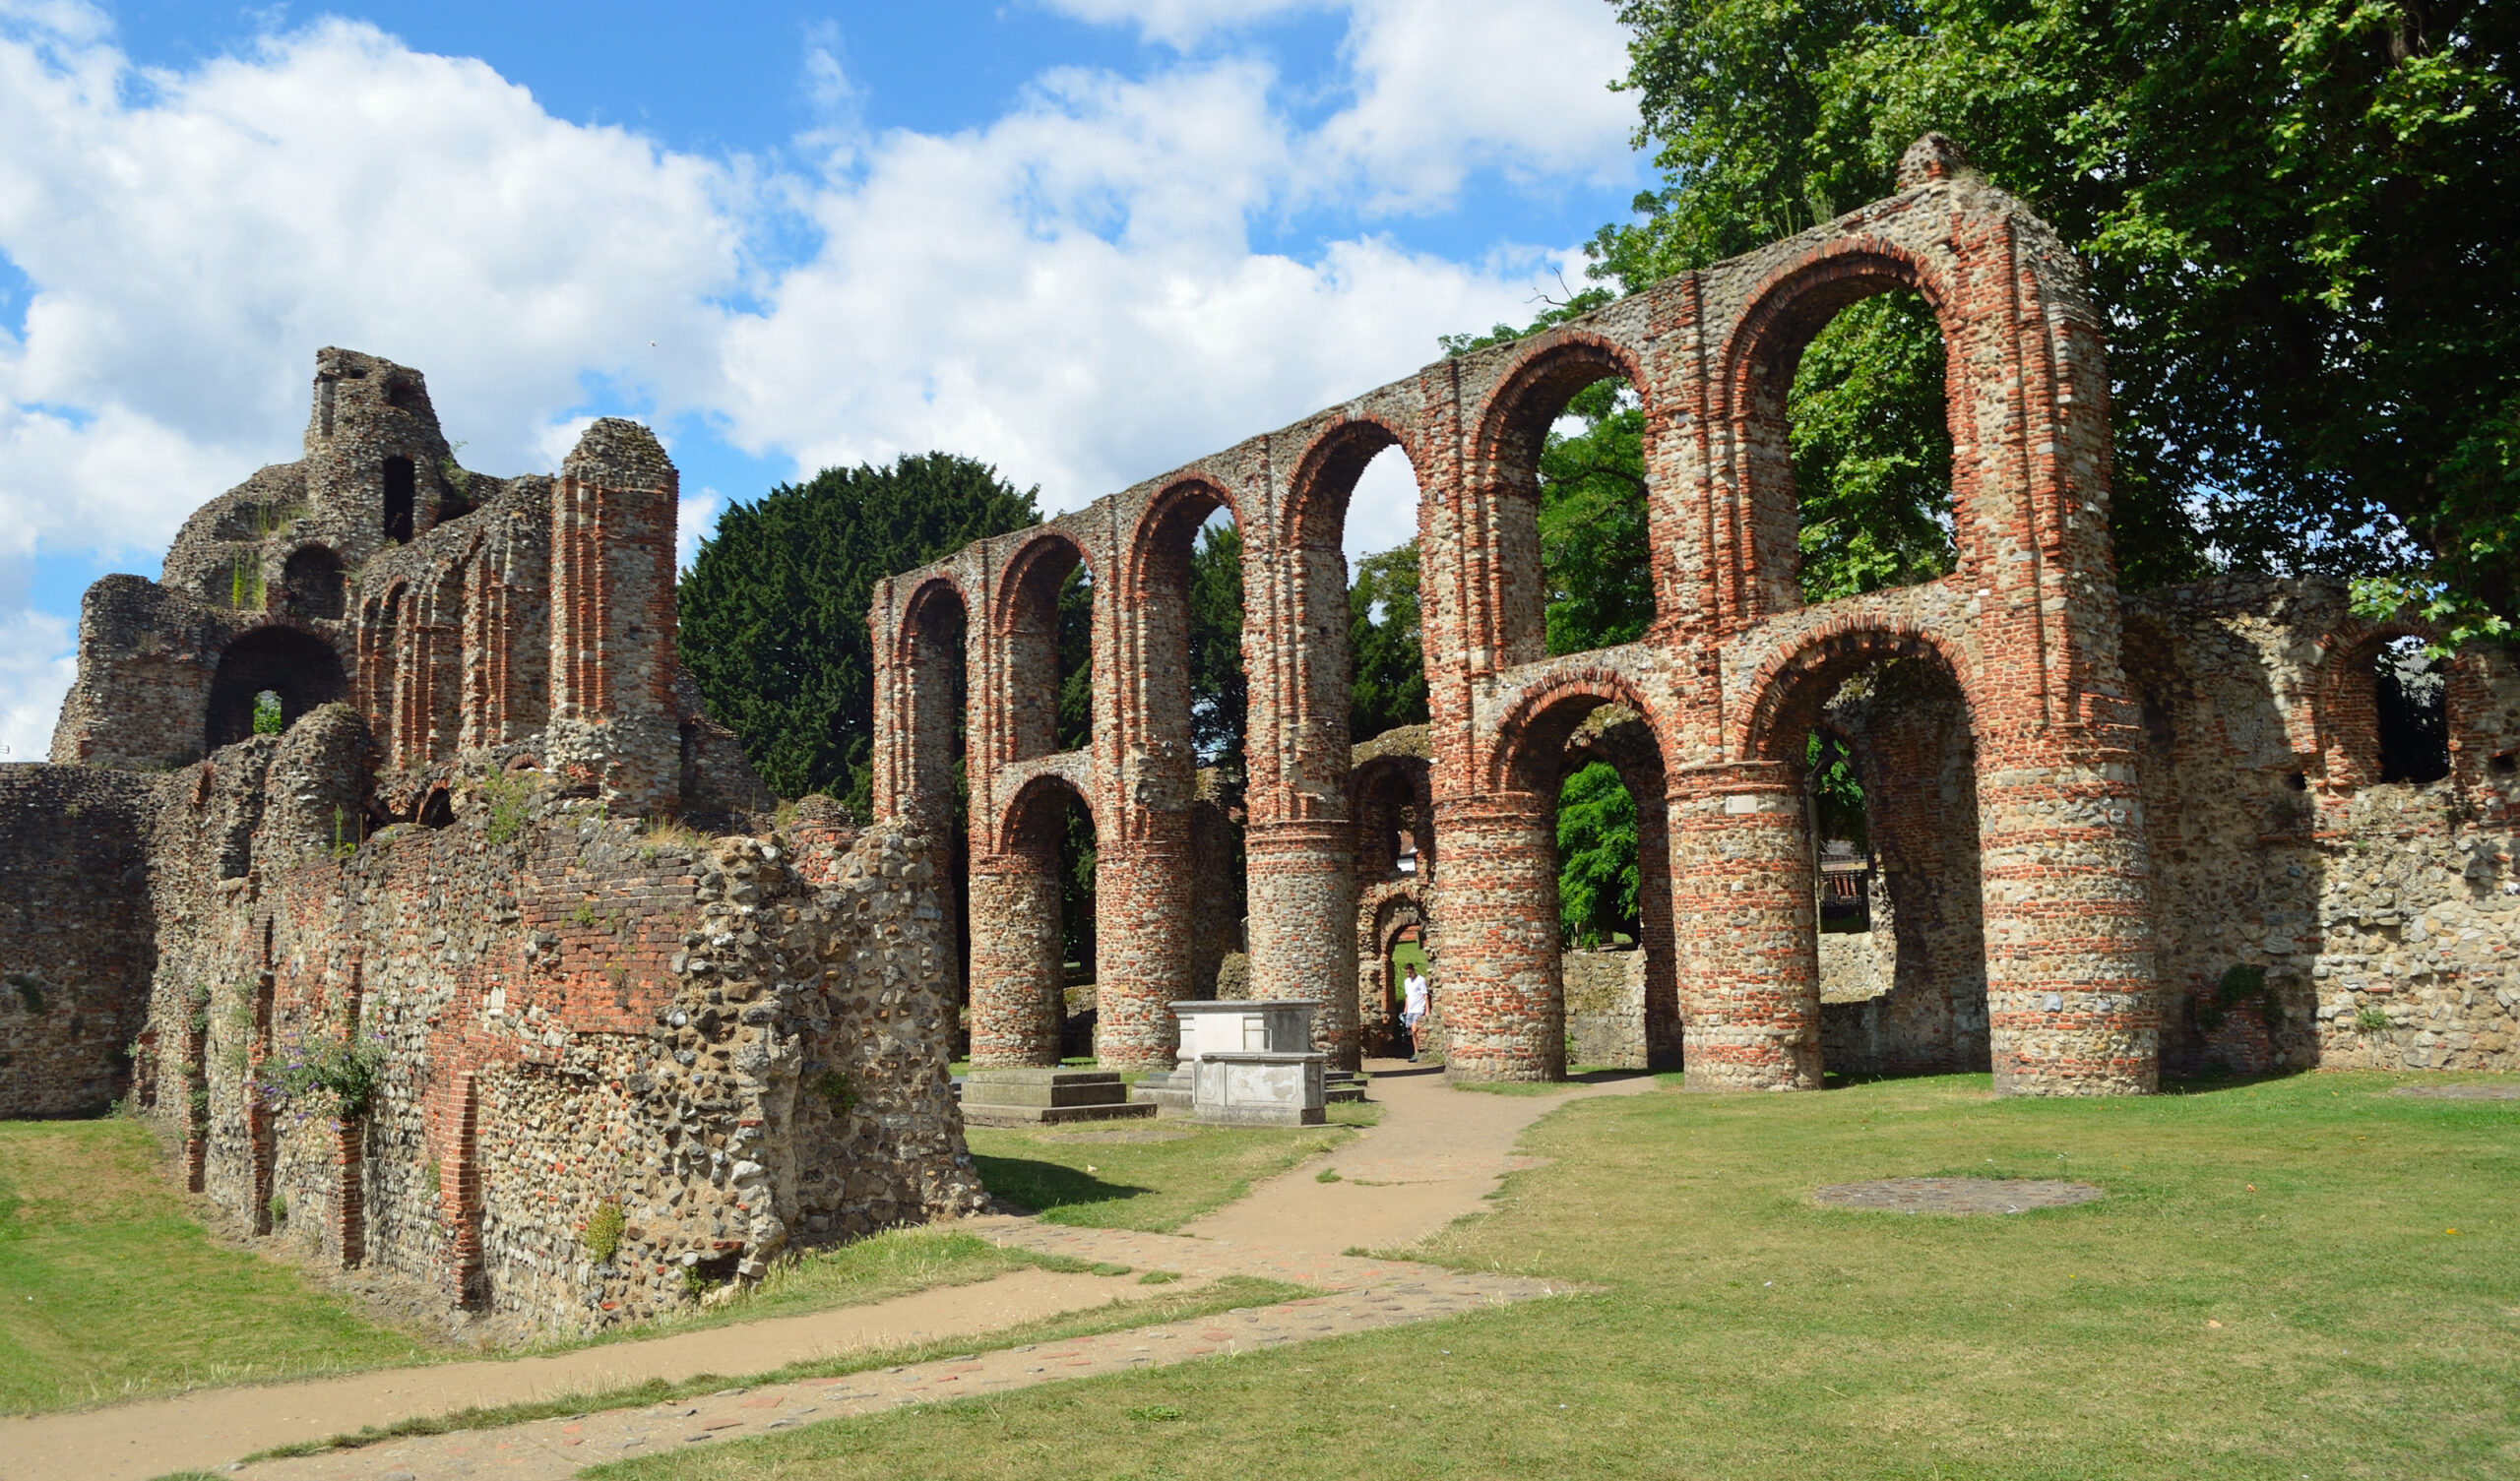 The remains of St. Botolph's Priory a Medieval Augustinian reli